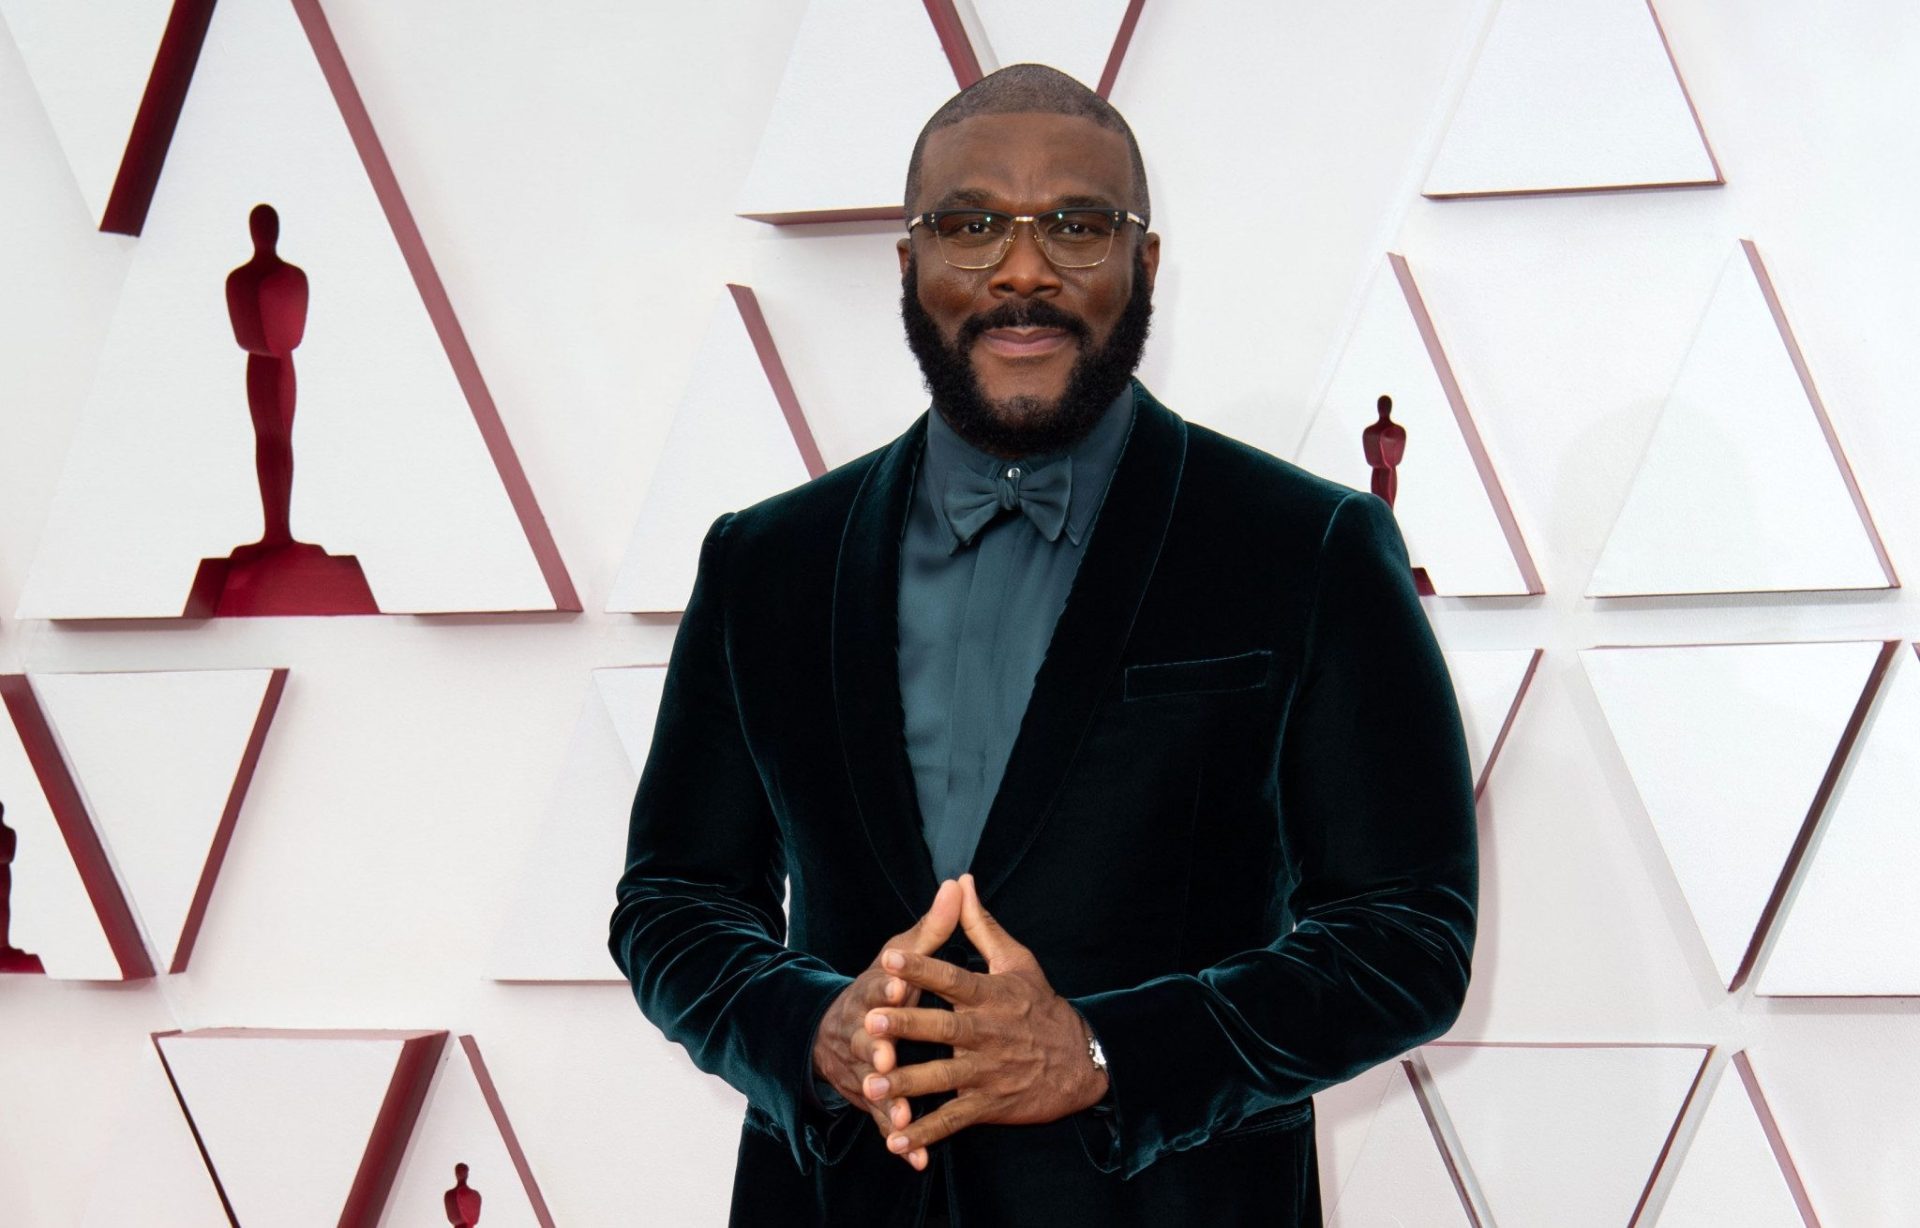 Tyler Perry trashed for telling Black women to get with men who earn less